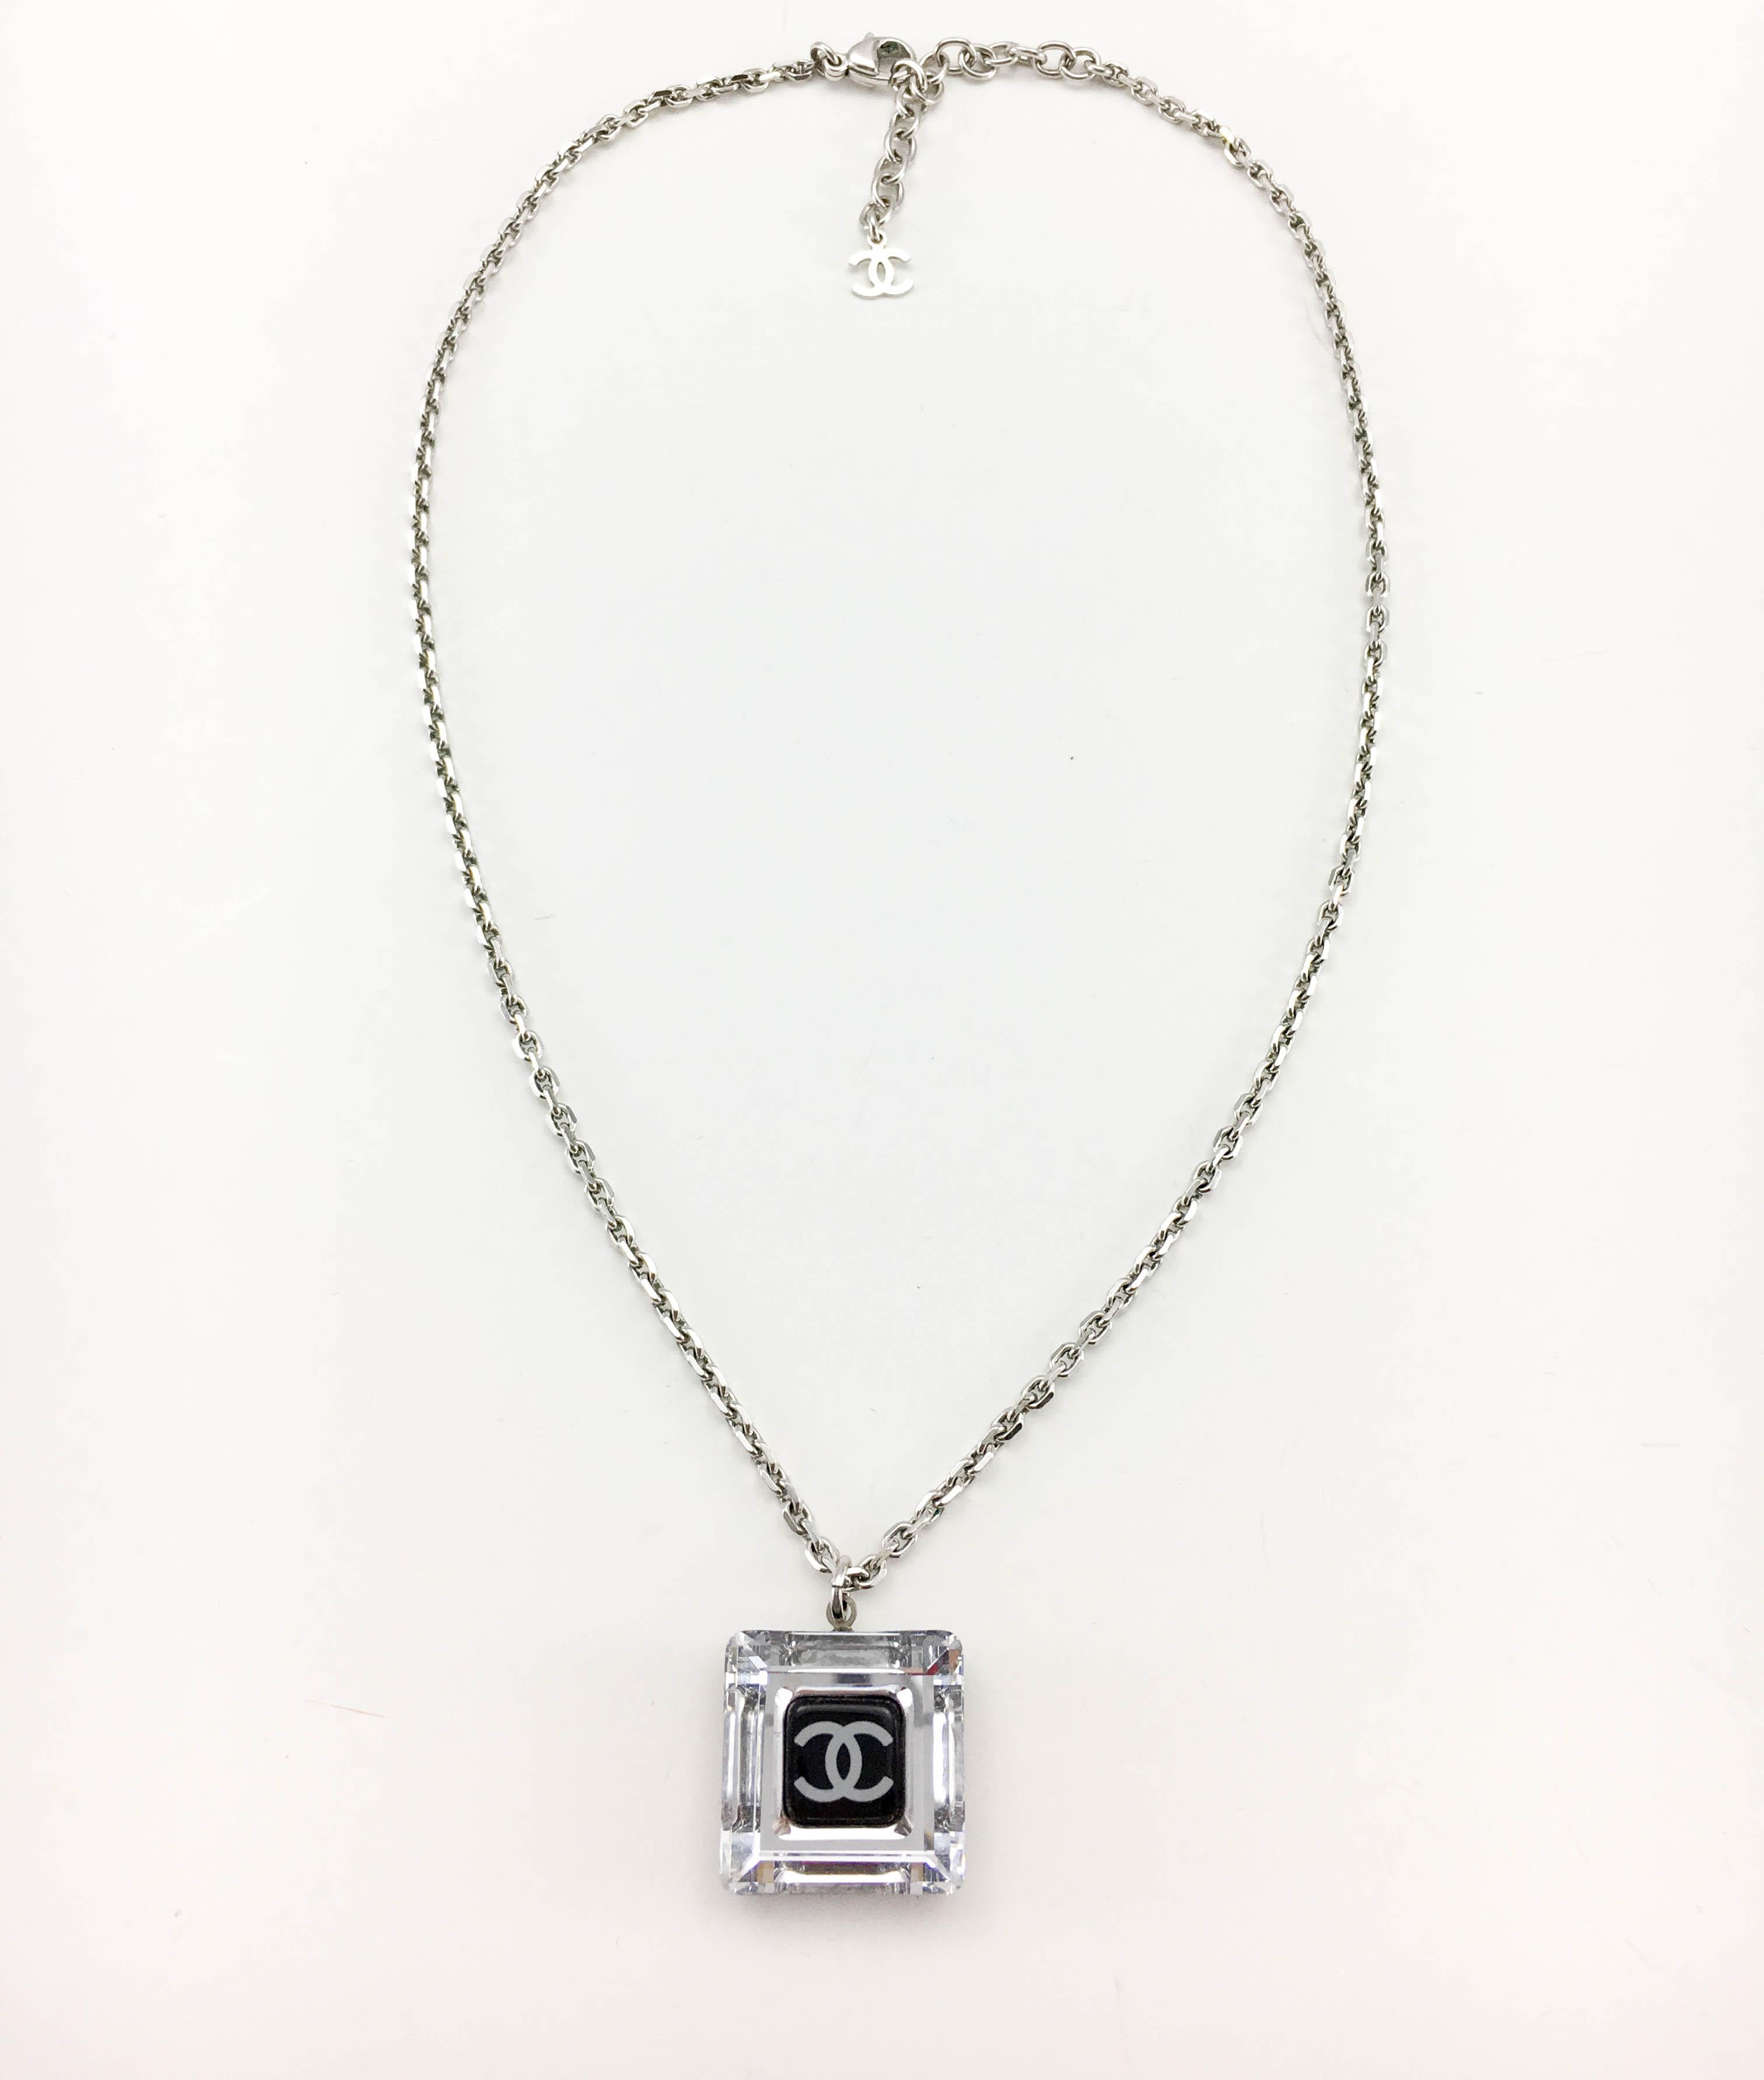 Chanel Square Logo Pendant Necklace. This beautiful necklace by Chanel were created for the 2005 Autumn / Winter Collection. Made in clear and black resin, this delicate square-shaped pendant features the iconic ‘CC’ logo in the centre. It hangs